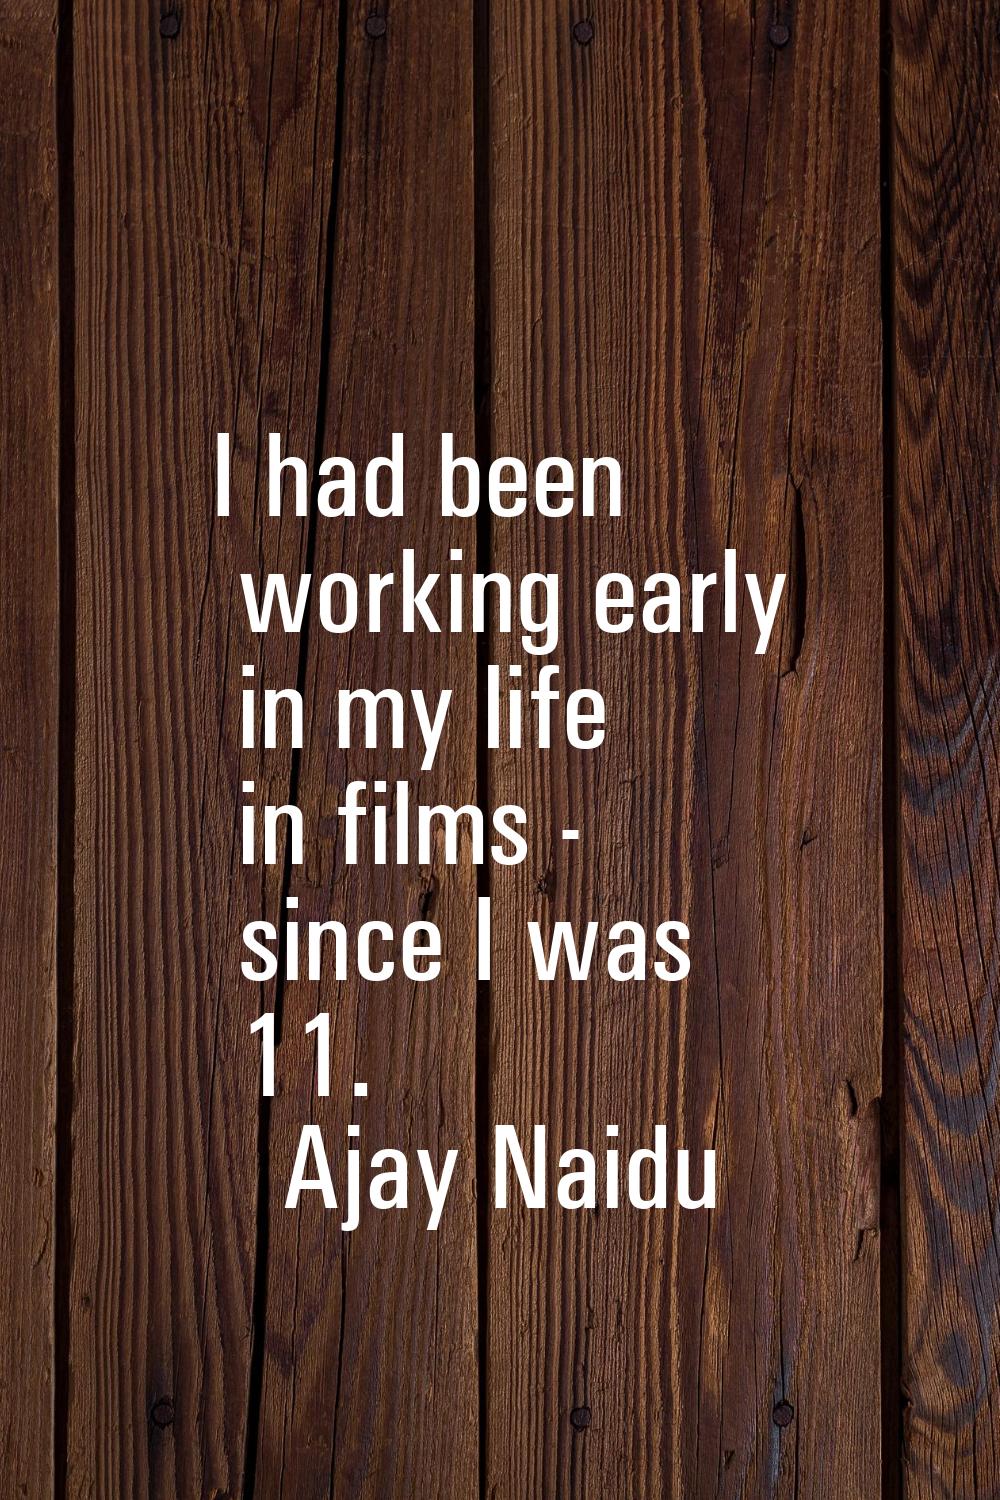 I had been working early in my life in films - since I was 11.